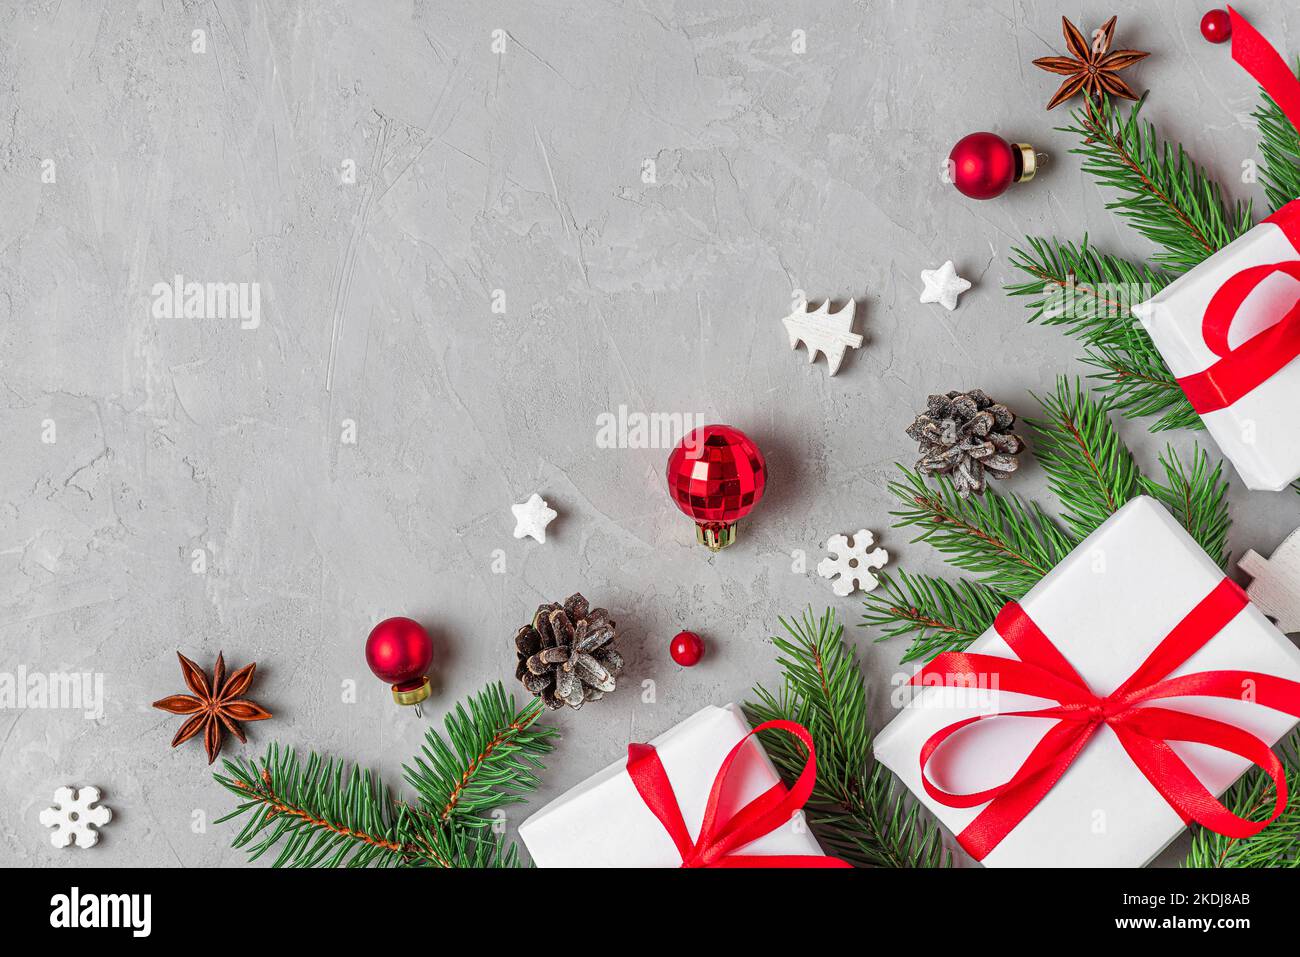 Christmas composition. White gift boxes, fir tree and holiday decorations on gray background. Flat lay. Layout. Top view with copy space Stock Photo